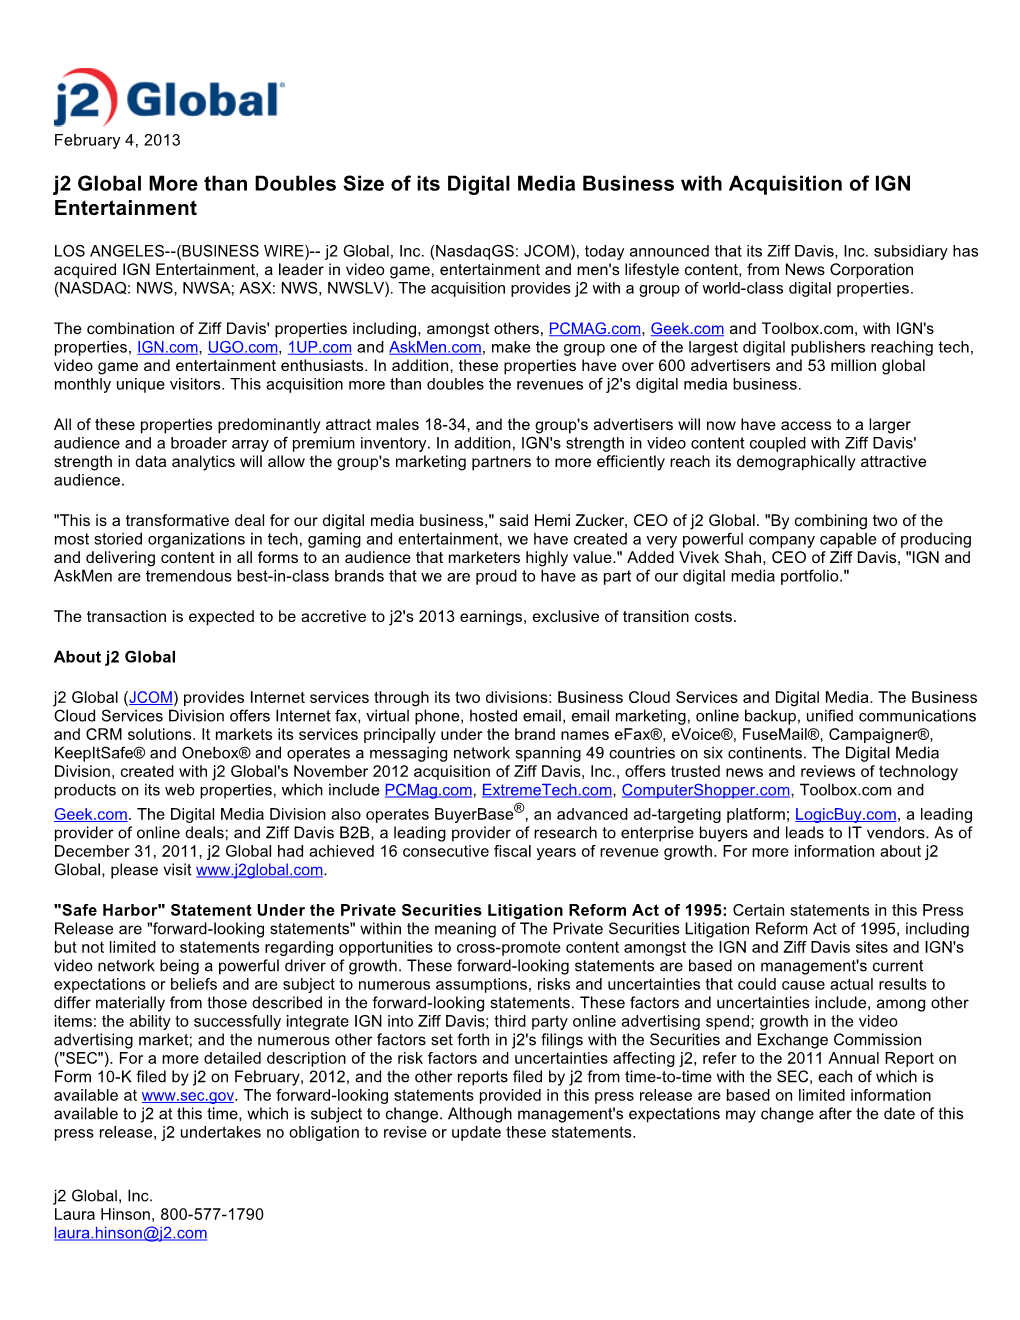 J2 Global More Than Doubles Size of Its Digital Media Business with Acquisition of IGN Entertainment